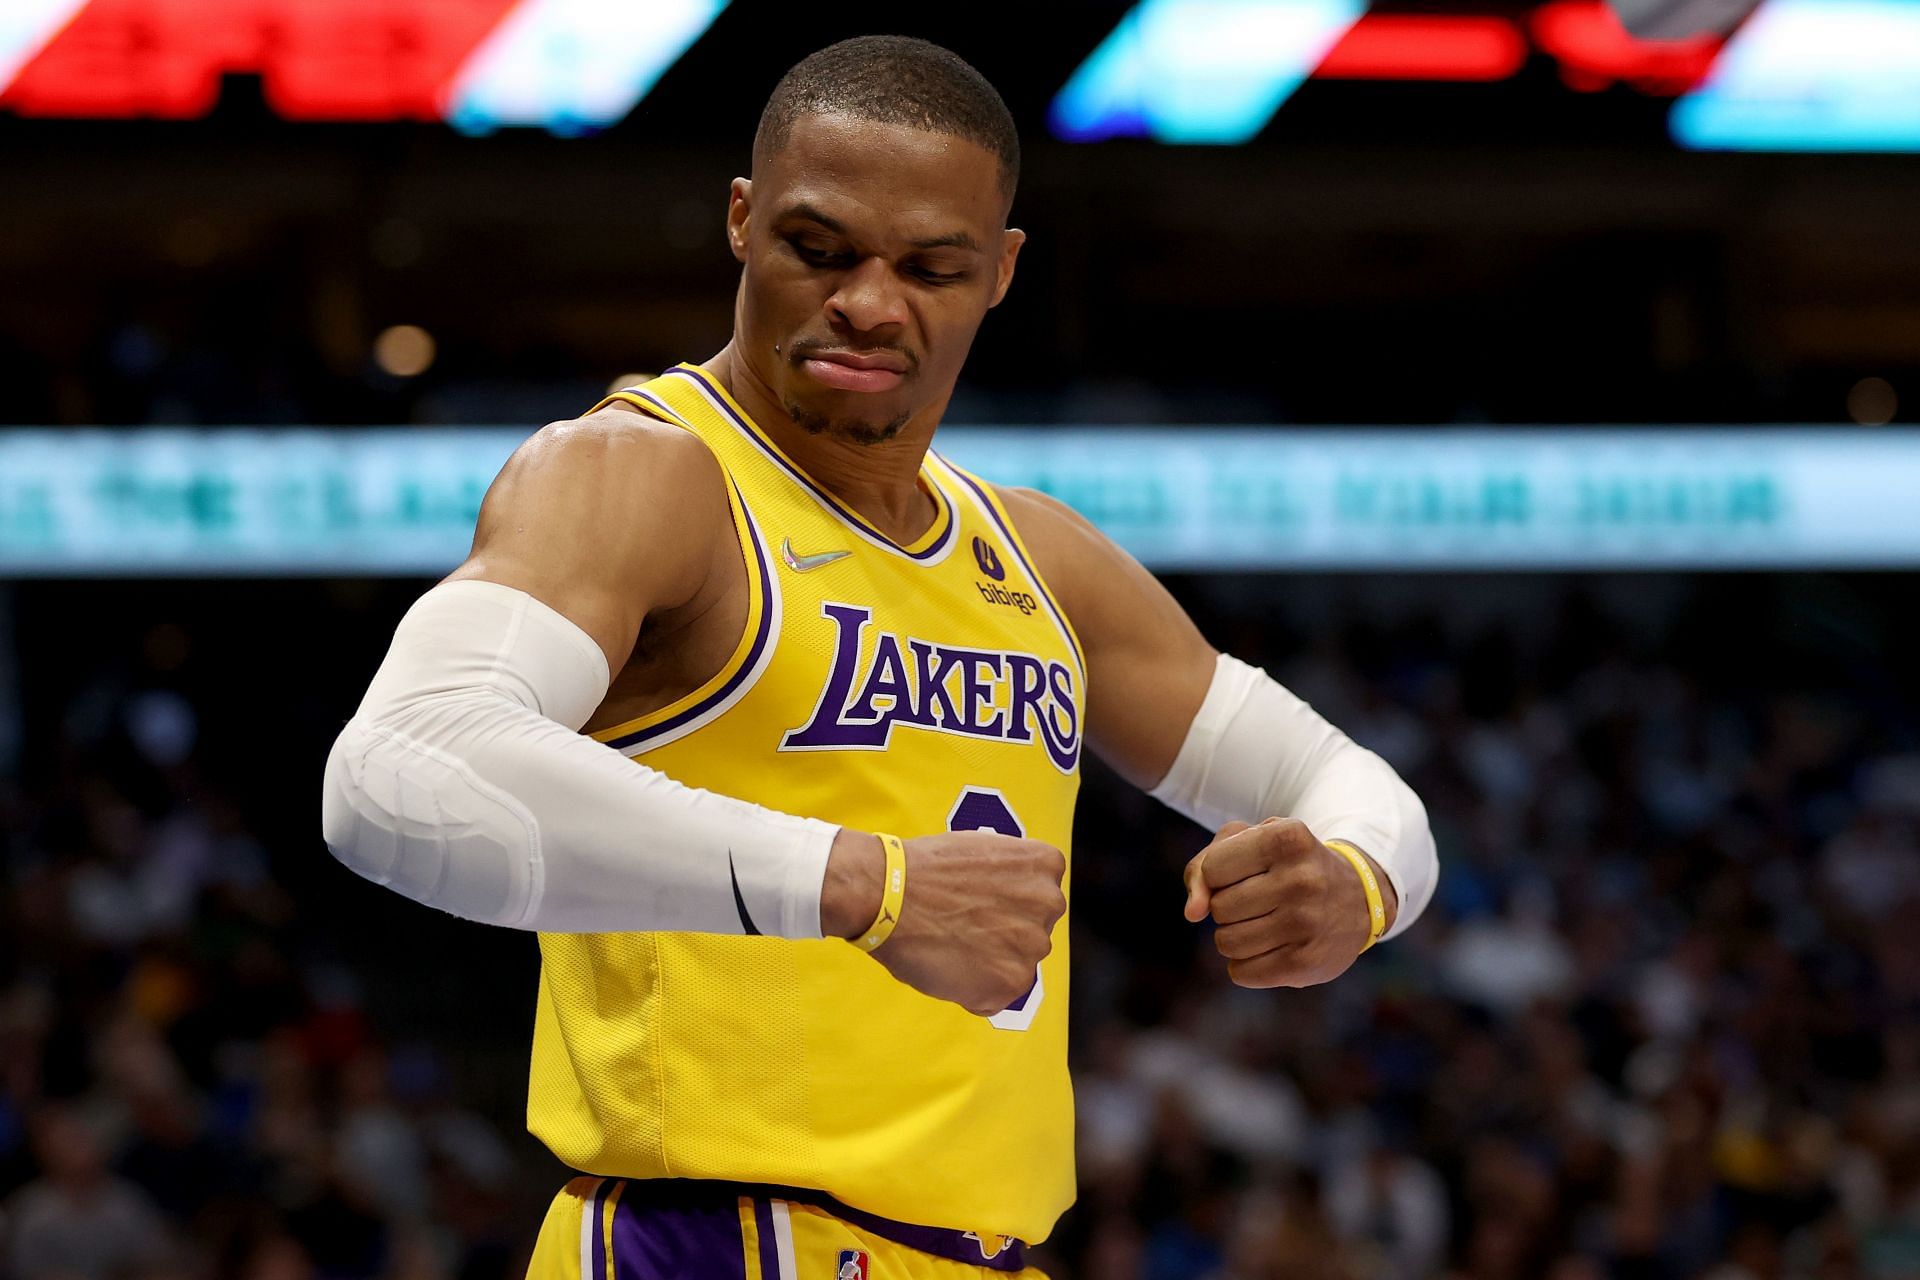 Russell Westbrook of the LA Lakers